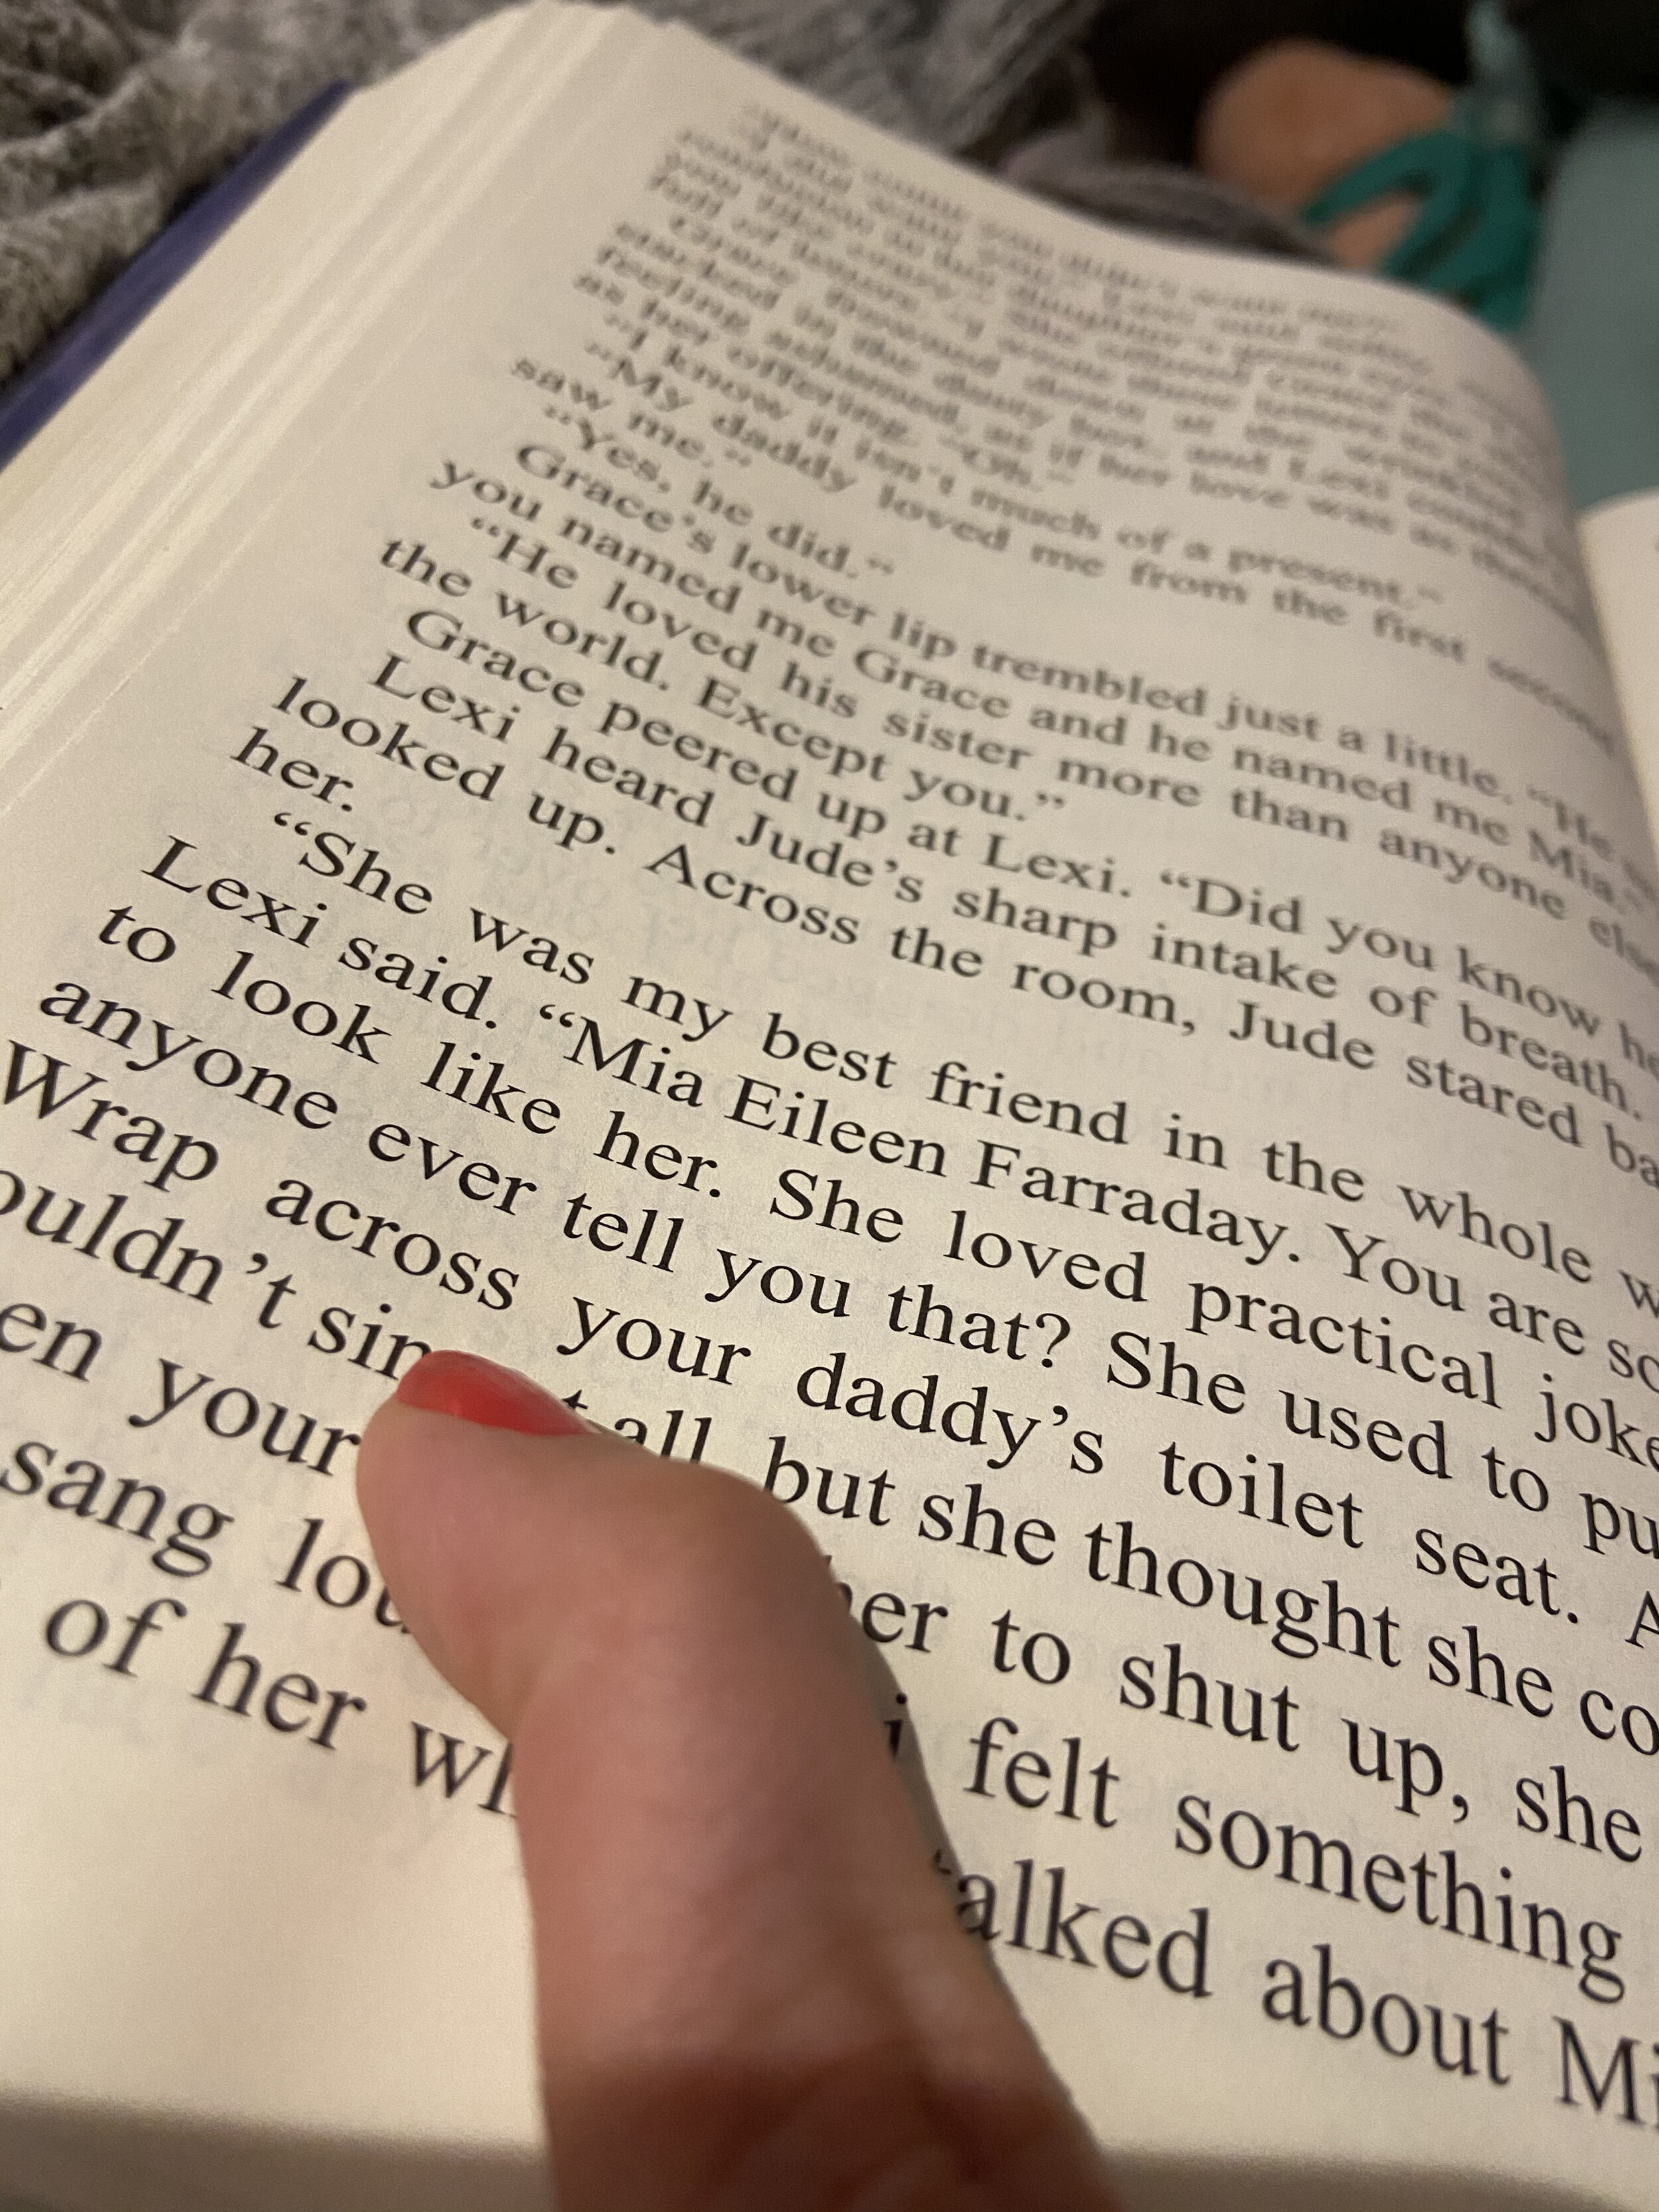 The author points to a section of a Kristen Hannah book that cracked her up. The text she is pointing to says, “She used to tape saran wrap across your daddy’s toilet.”